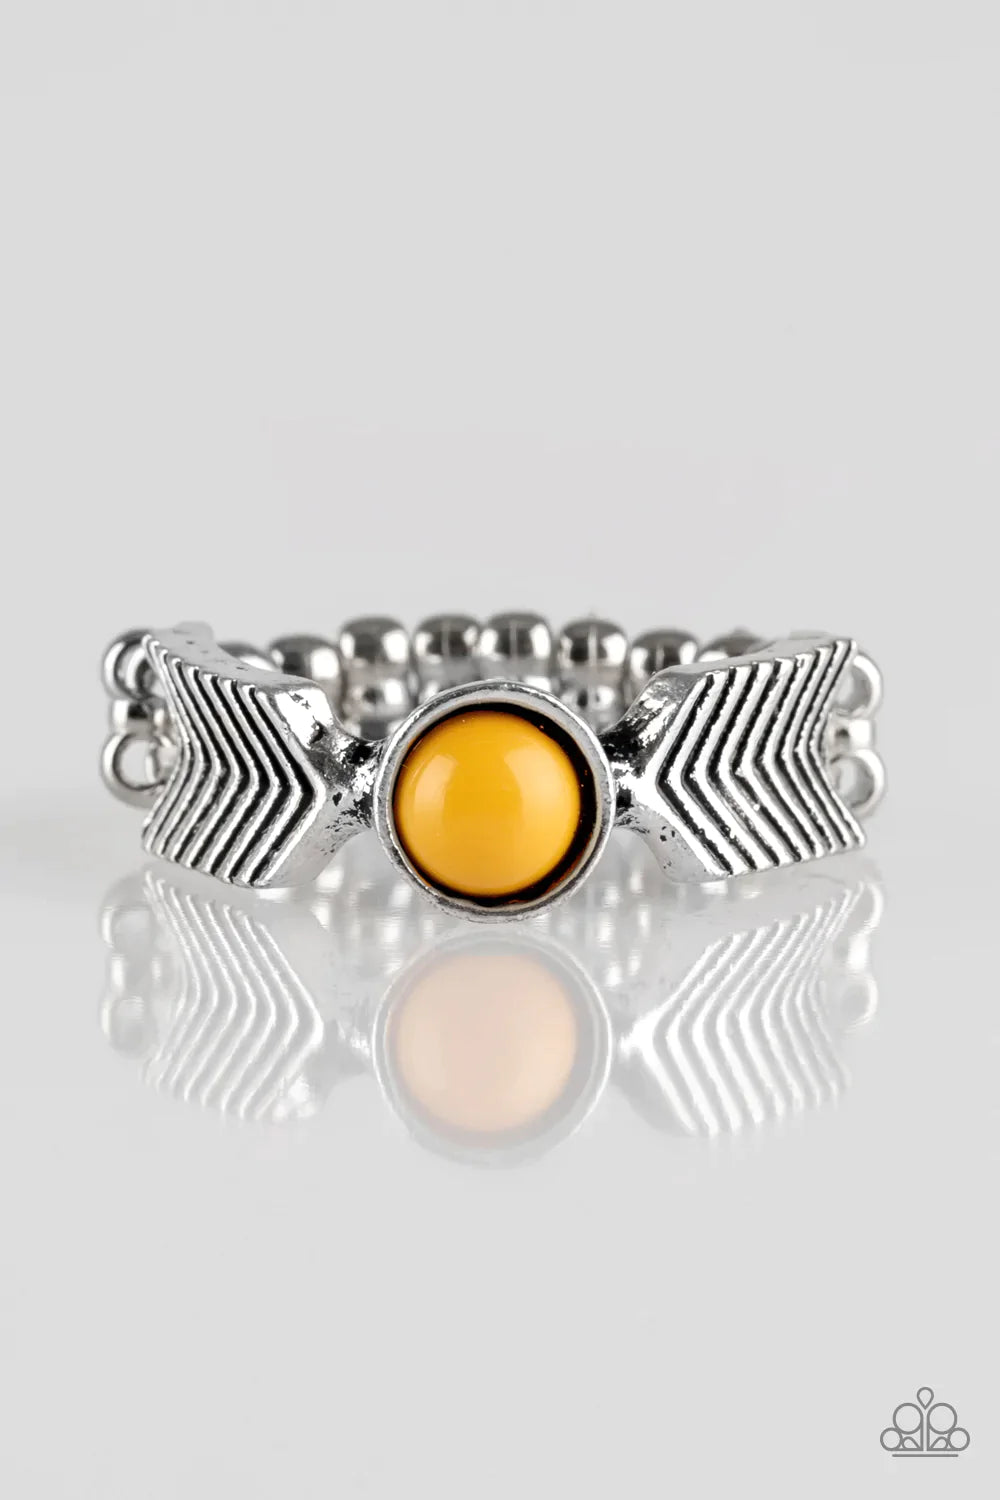 Paparazzi Ring ~ Awesomely ARROW-Dynamic - Yellow